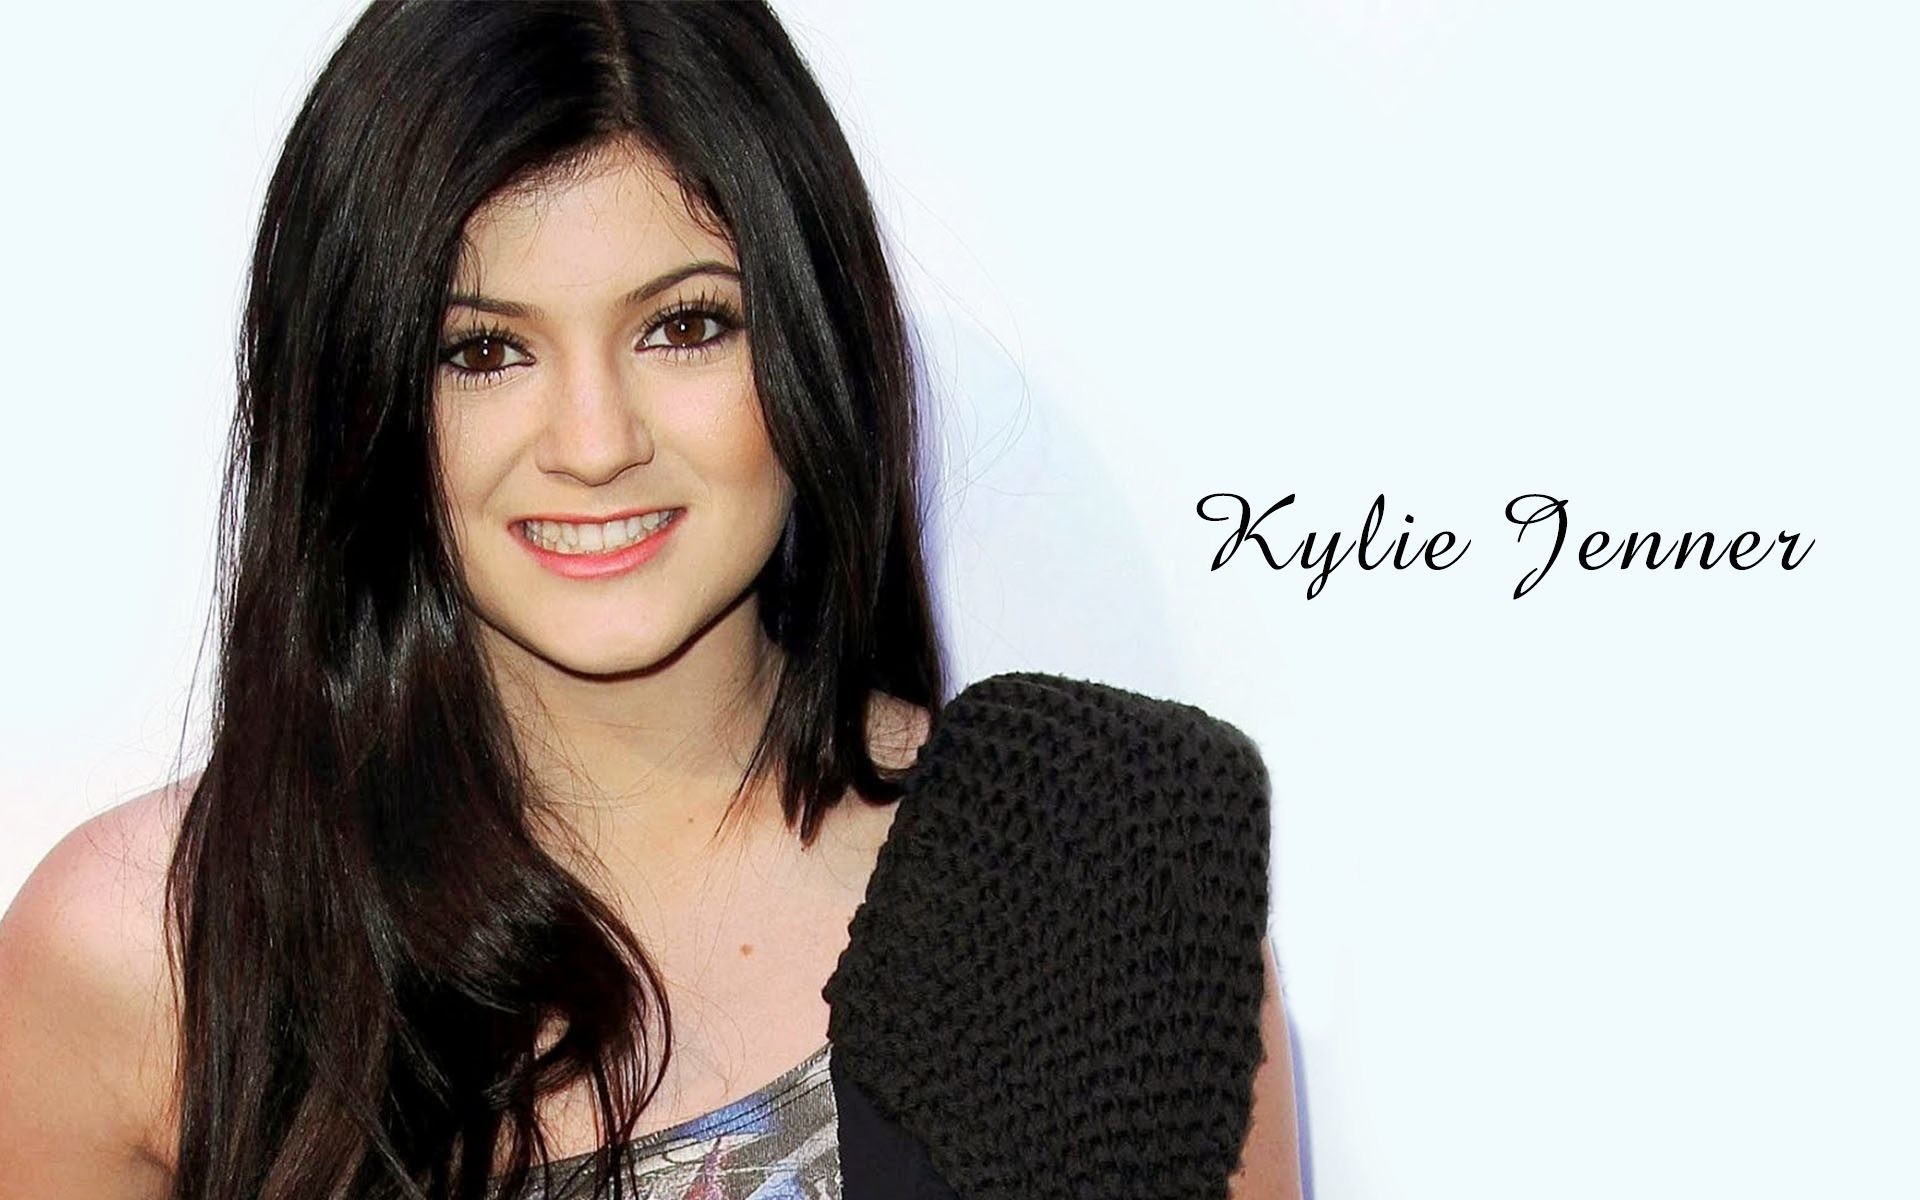 Kylie Jenner Wallpapers Wallpapertag Images, Photos, Reviews